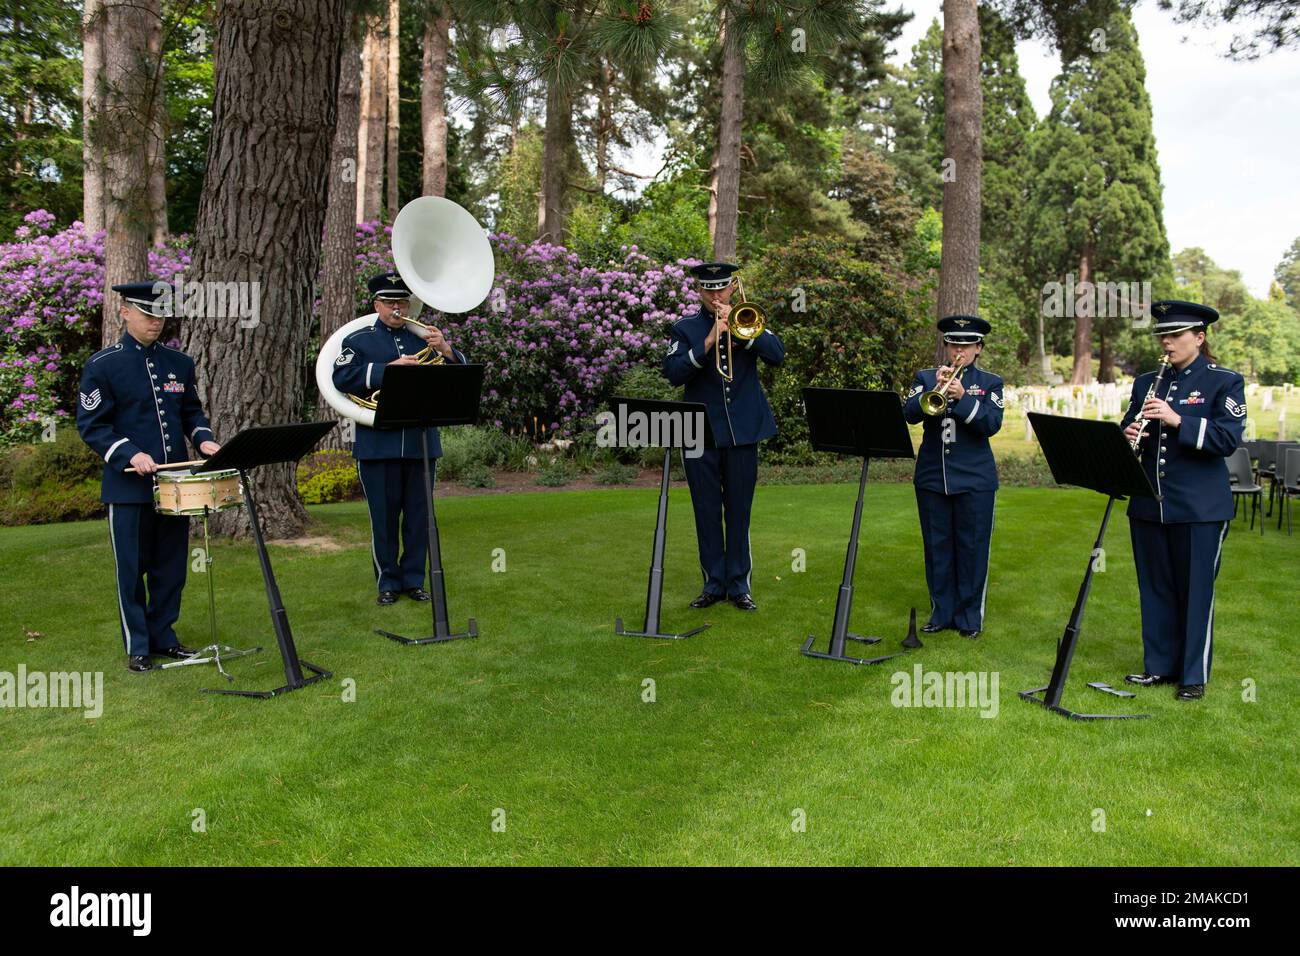 U.S. Air Forces in Europe Band provides musical support during a Memorial Day ceremony at the Brookwood American Military Cemetery, England, May 29, 2022. Memorial Day provides us a solemn opportunity to remember our fallen brothers and sisters in arms, reflect upon their courageous sacrifice, and show gratitude for the freedom they gave their lives to defend. It also affords us the opportunity to pay homage to those families who lost their loved ones in service to the Nation-and continue to feel the full weight of that sacrifice today. Stock Photo